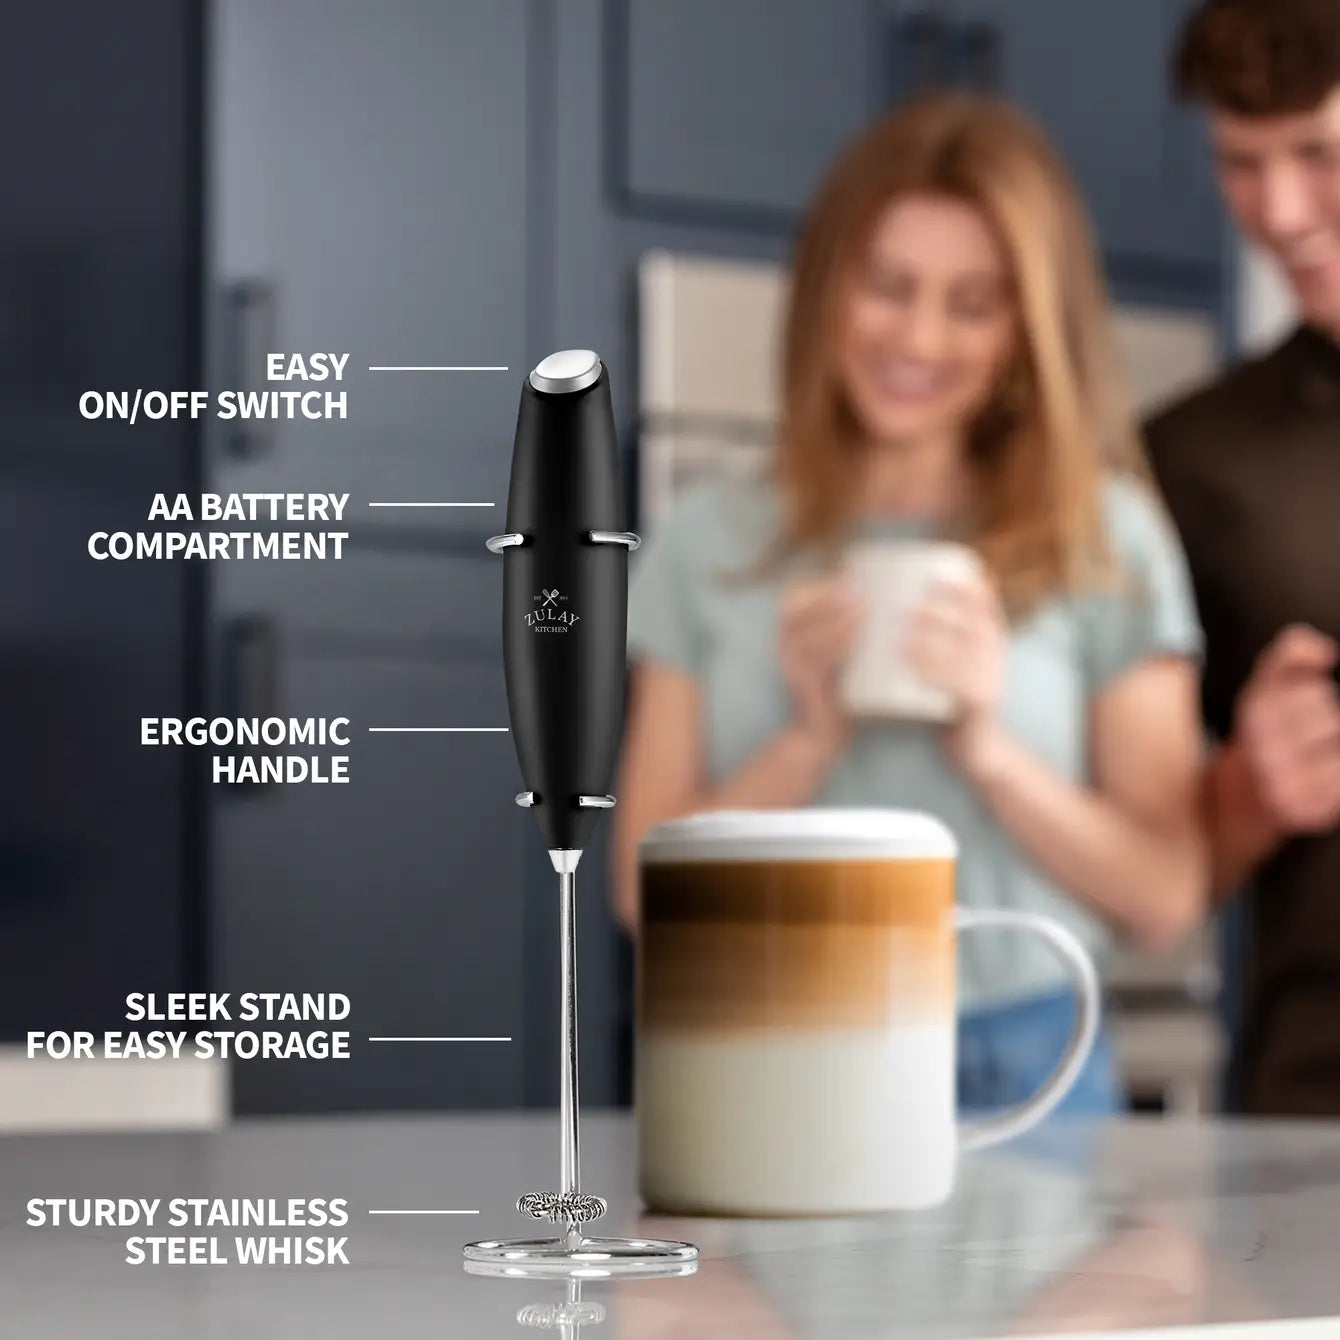 Milk Frother with Stand, Batteries Included